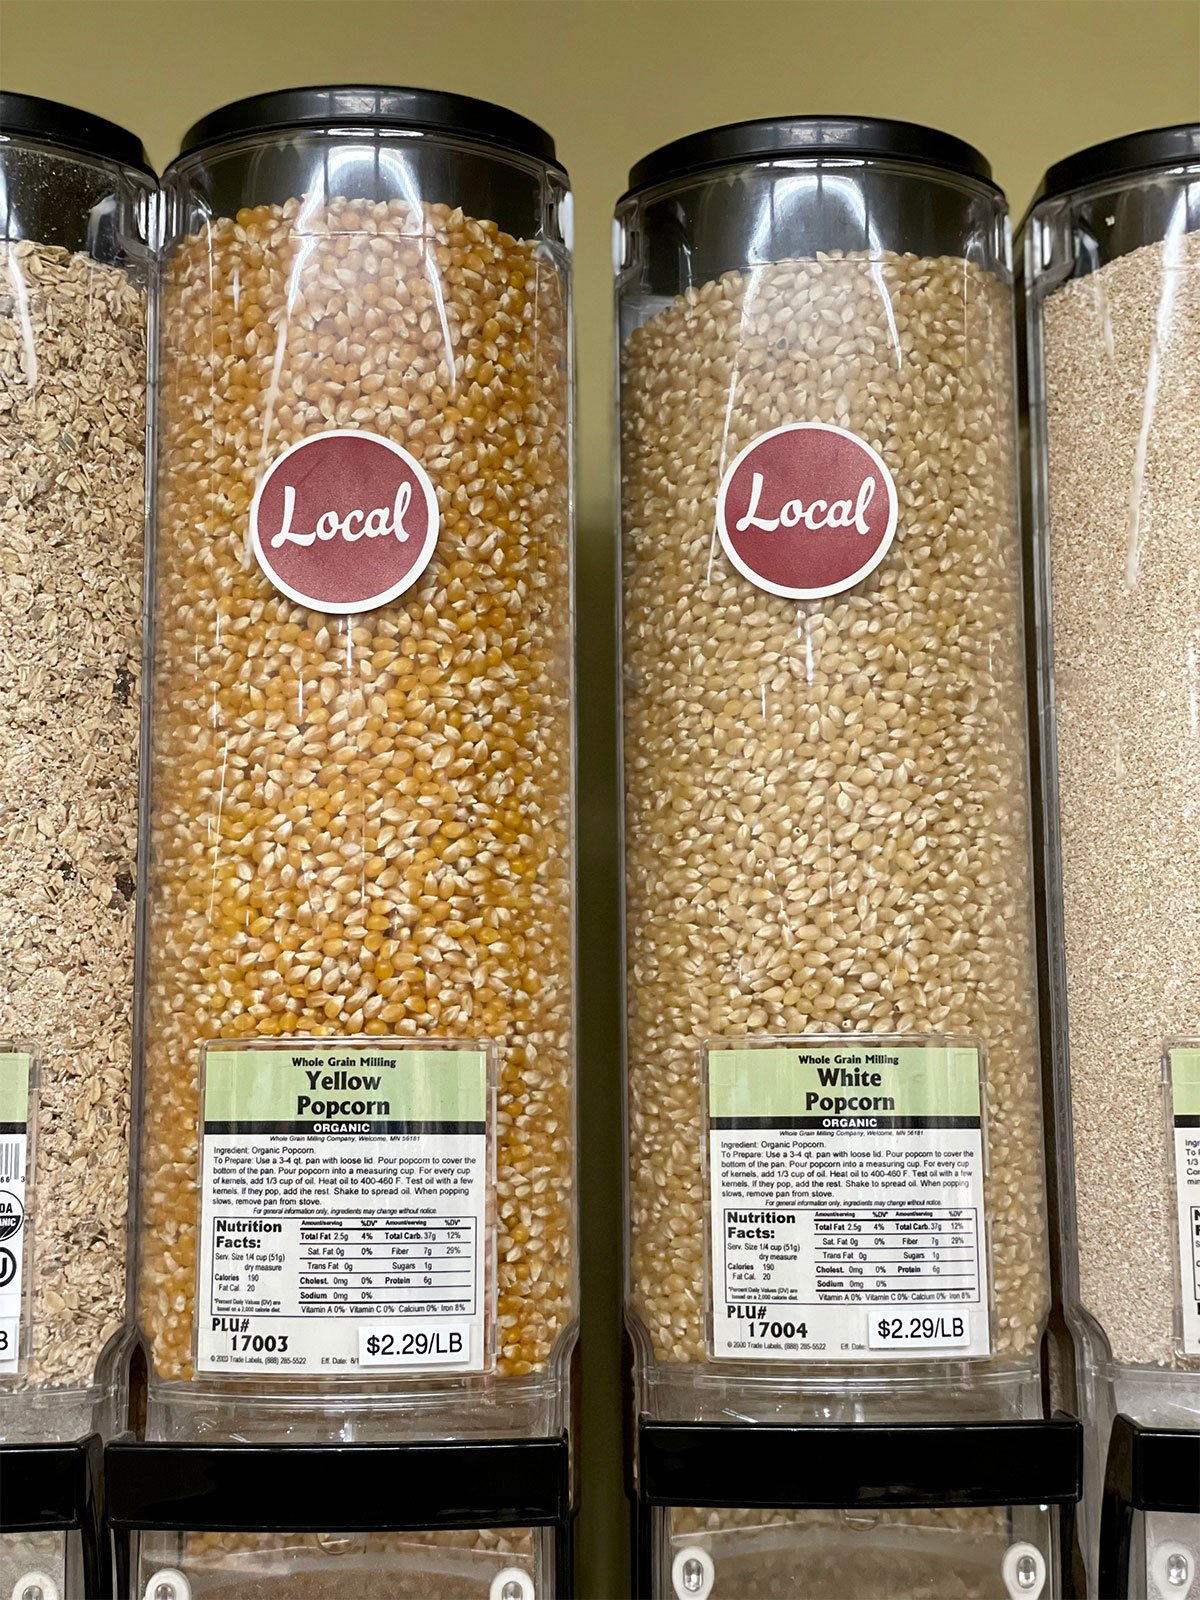   Did you know that the popcorn kernels in the bulk section at People’s Food Co-op-Rochester are from Whole Grain Milling Company in Welcome, MN? These kernels are so fresh and make excellent popcorn!  